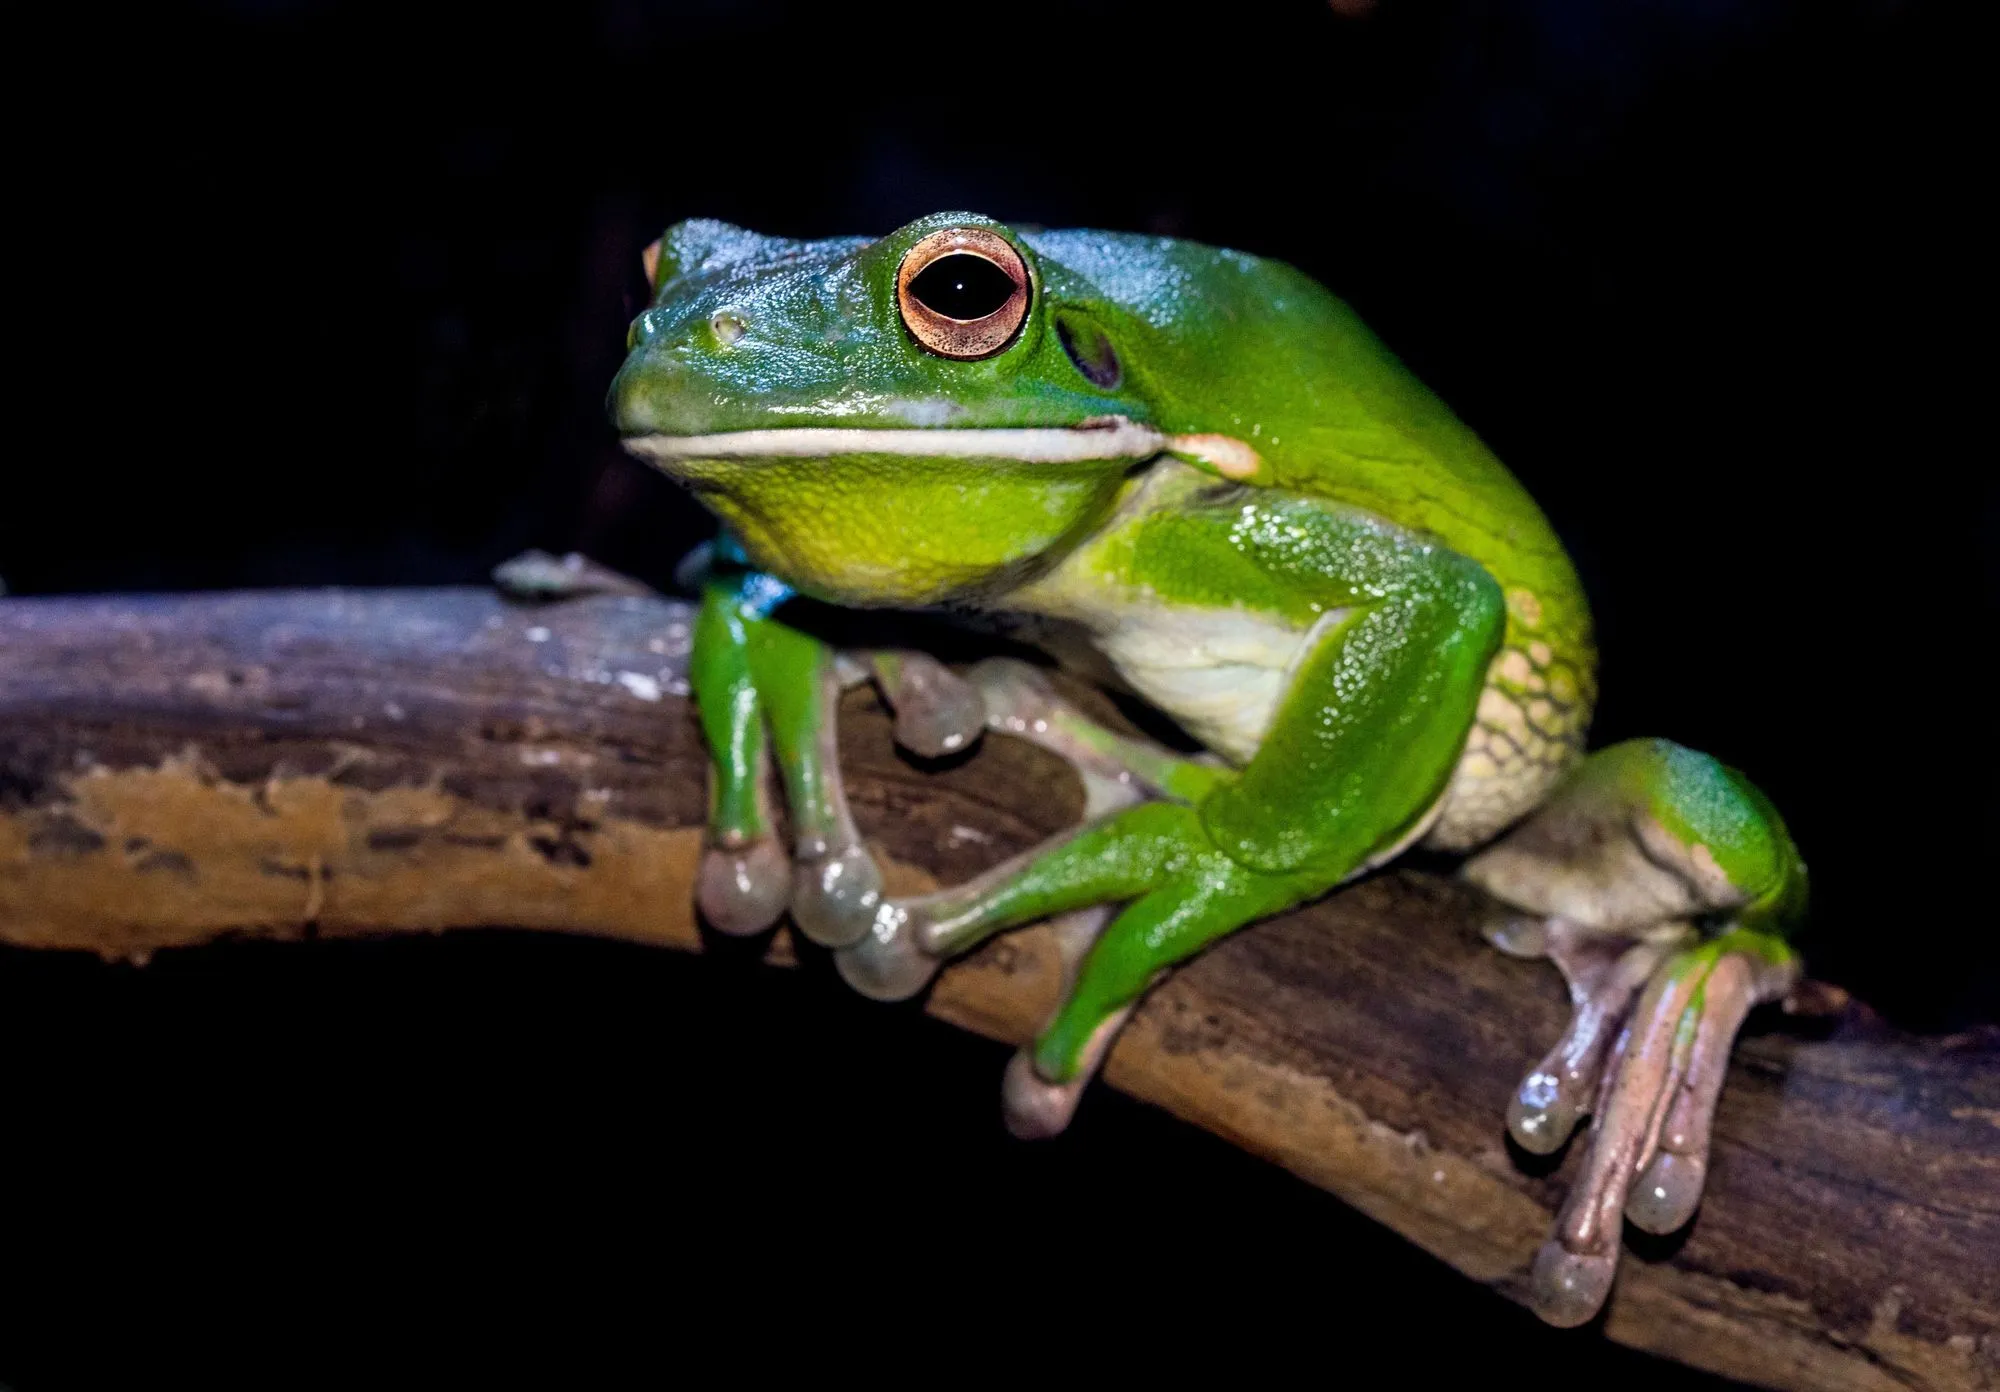 Some frogs give out toxic secretions that are capable of killing an adult human.